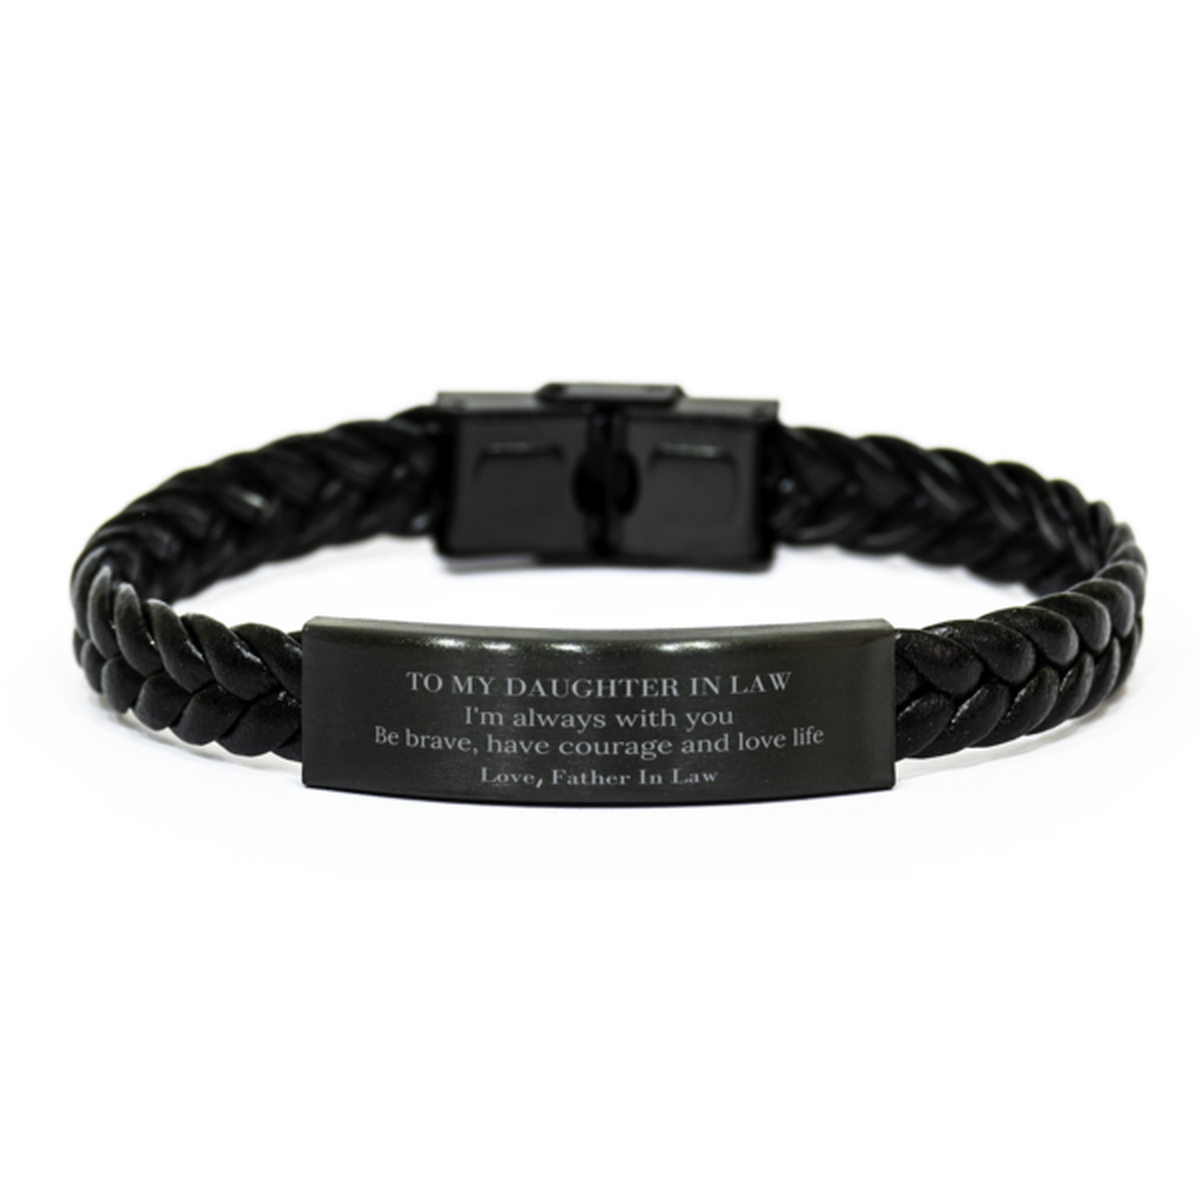 To My Daughter In Law Gifts from Father In Law, Unique Braided Leather Bracelet Inspirational Christmas Birthday Graduation Gifts for Daughter In Law I'm always with you. Be brave, have courage and love life. Love, Father In Law